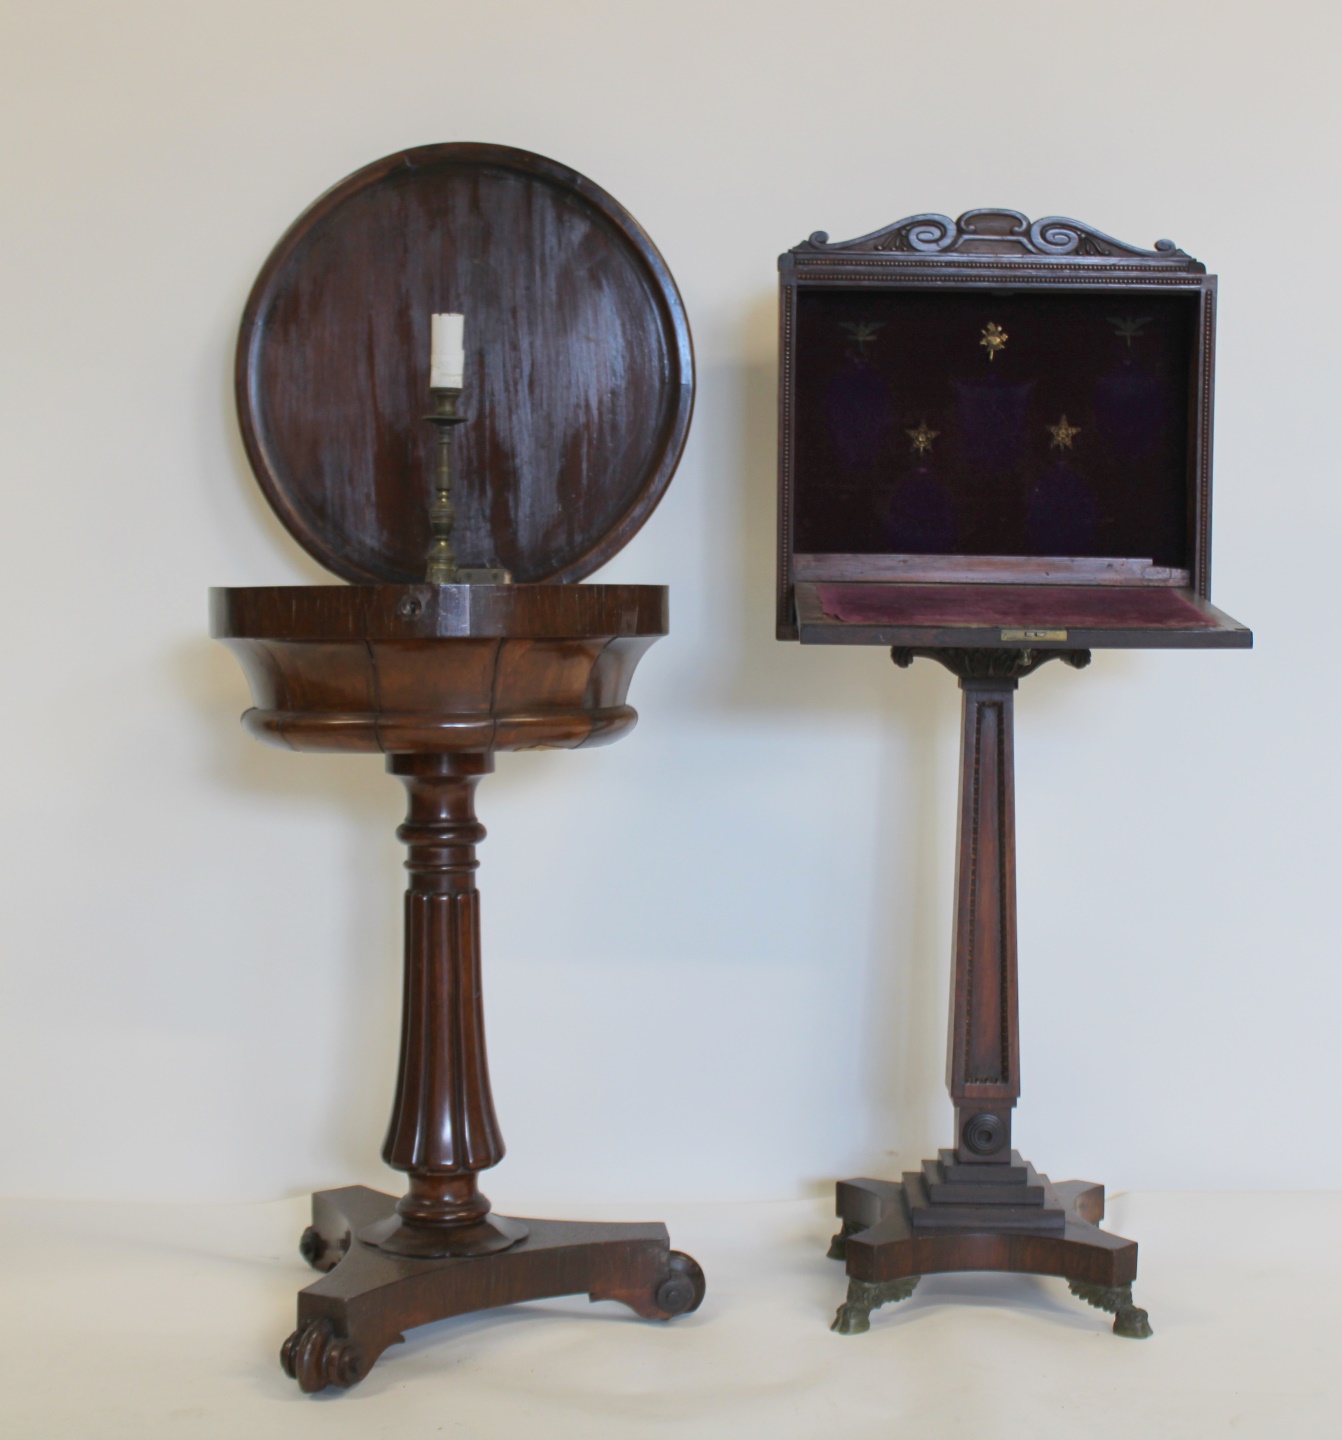 2 REGENCY ROSEWOOD STANDS. 1 a